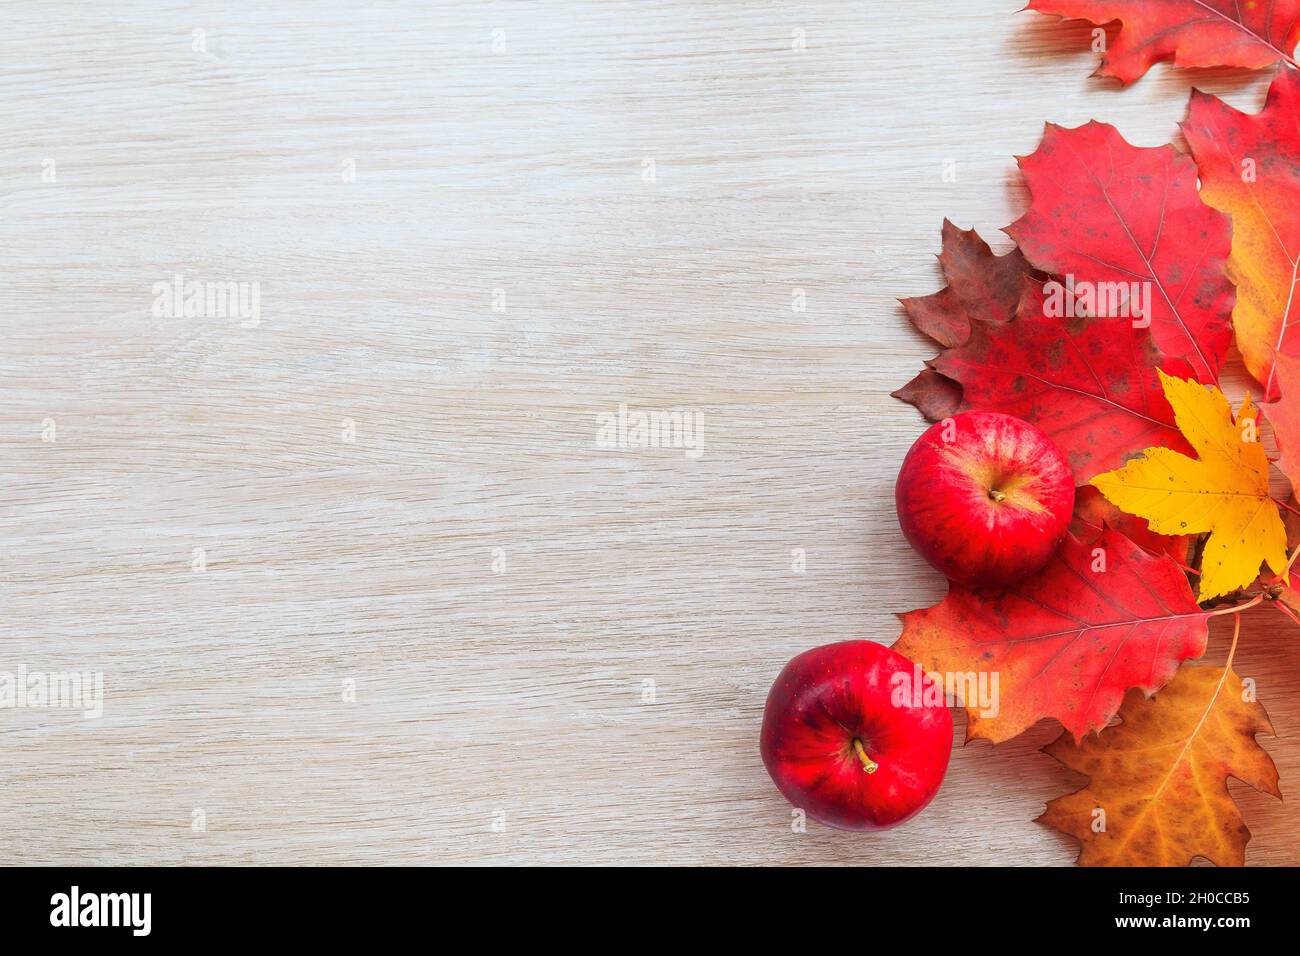 Autumn decor from leaves and red apple on a wooden background. Flat lay autumn composition with copy space. Stock Photo